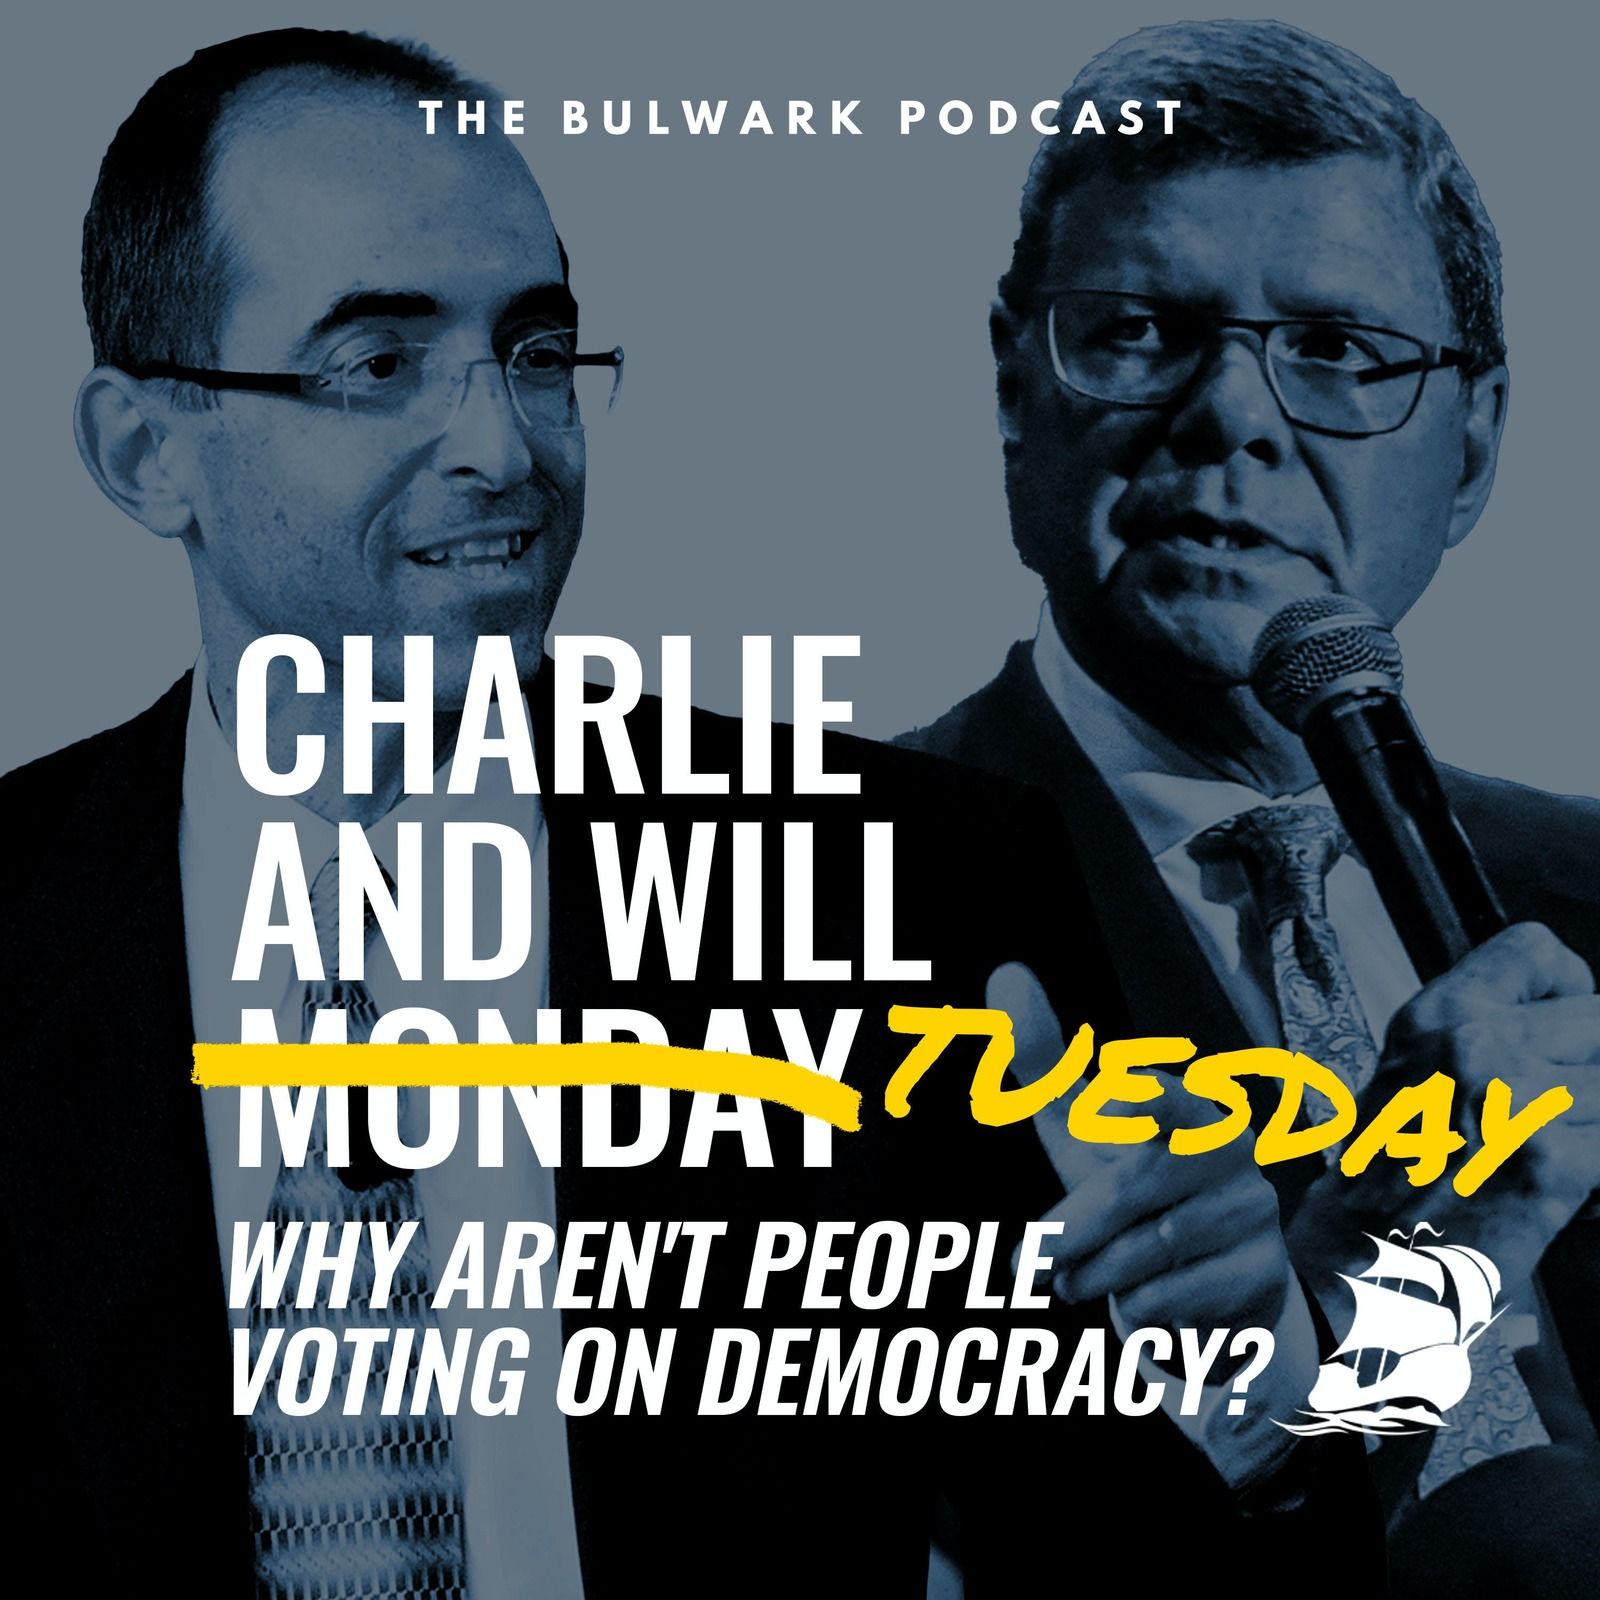 Will Saletan: Why Aren't People Voting on Democracy? by The Bulwark Podcast